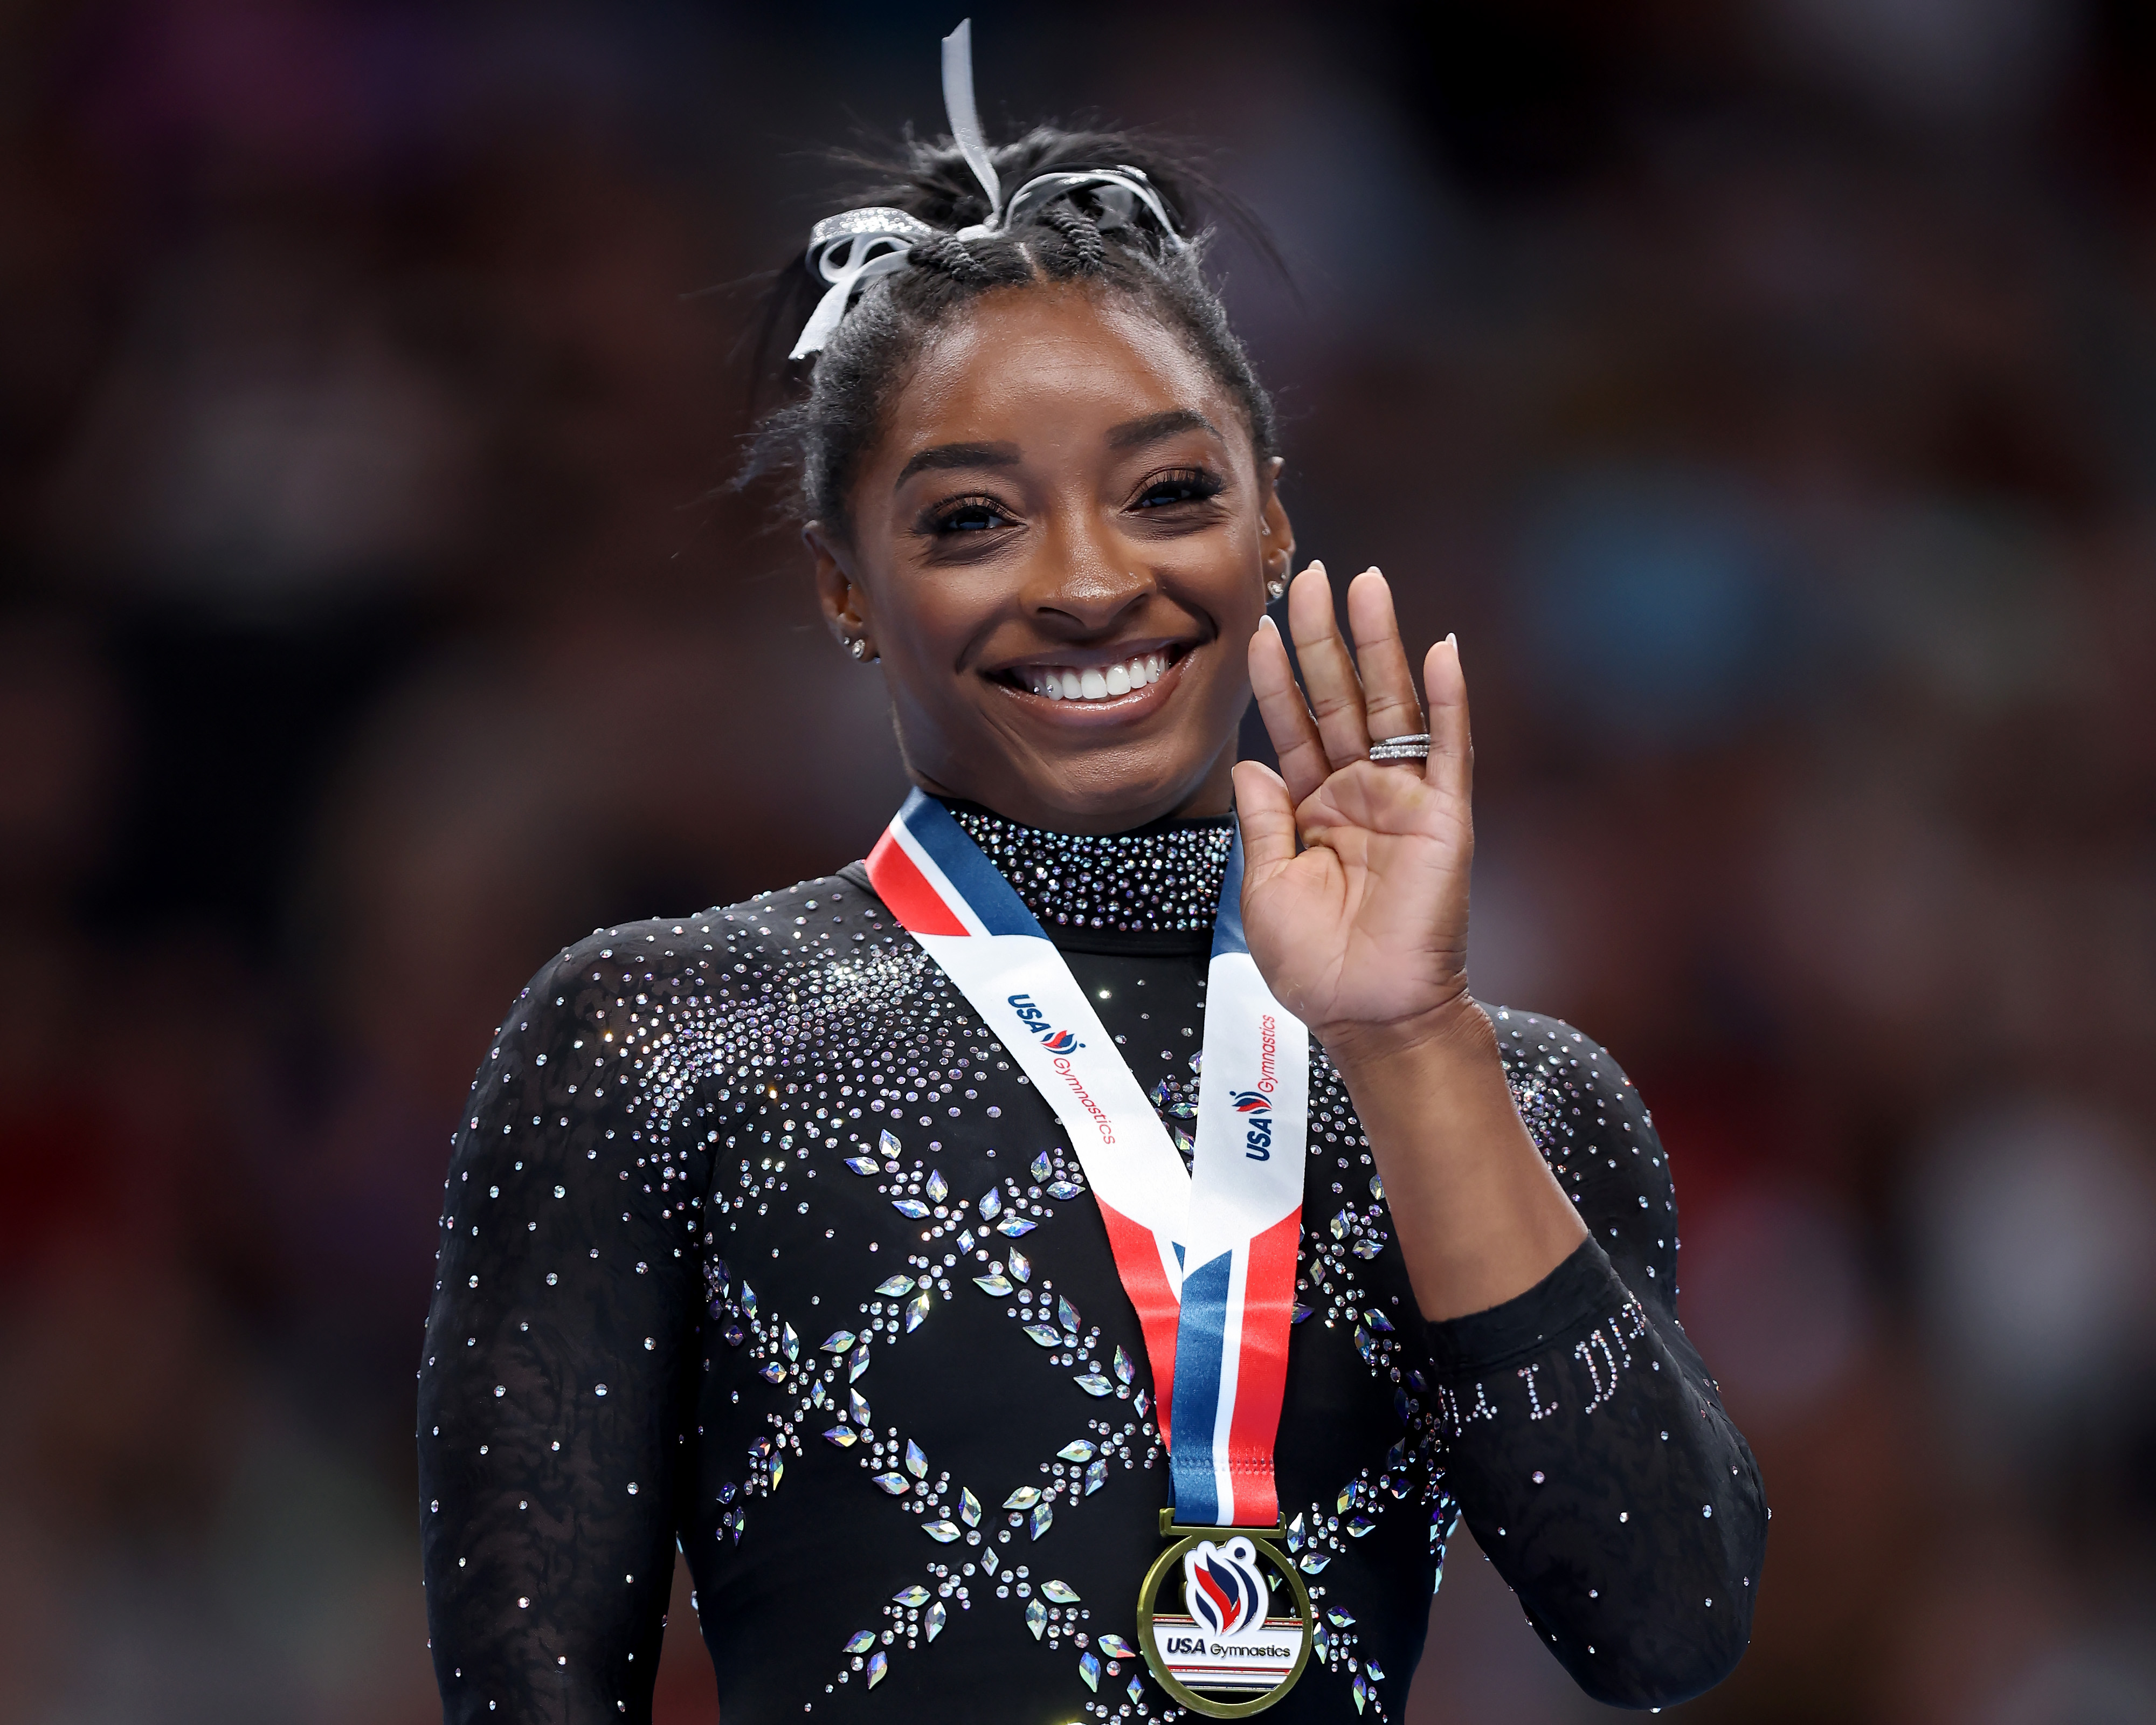 Simone Biles during the 2023 U.S. Gymnastics Championships at SAP Center on August 27, 2023 in San Jose, California | Source: Getty Images